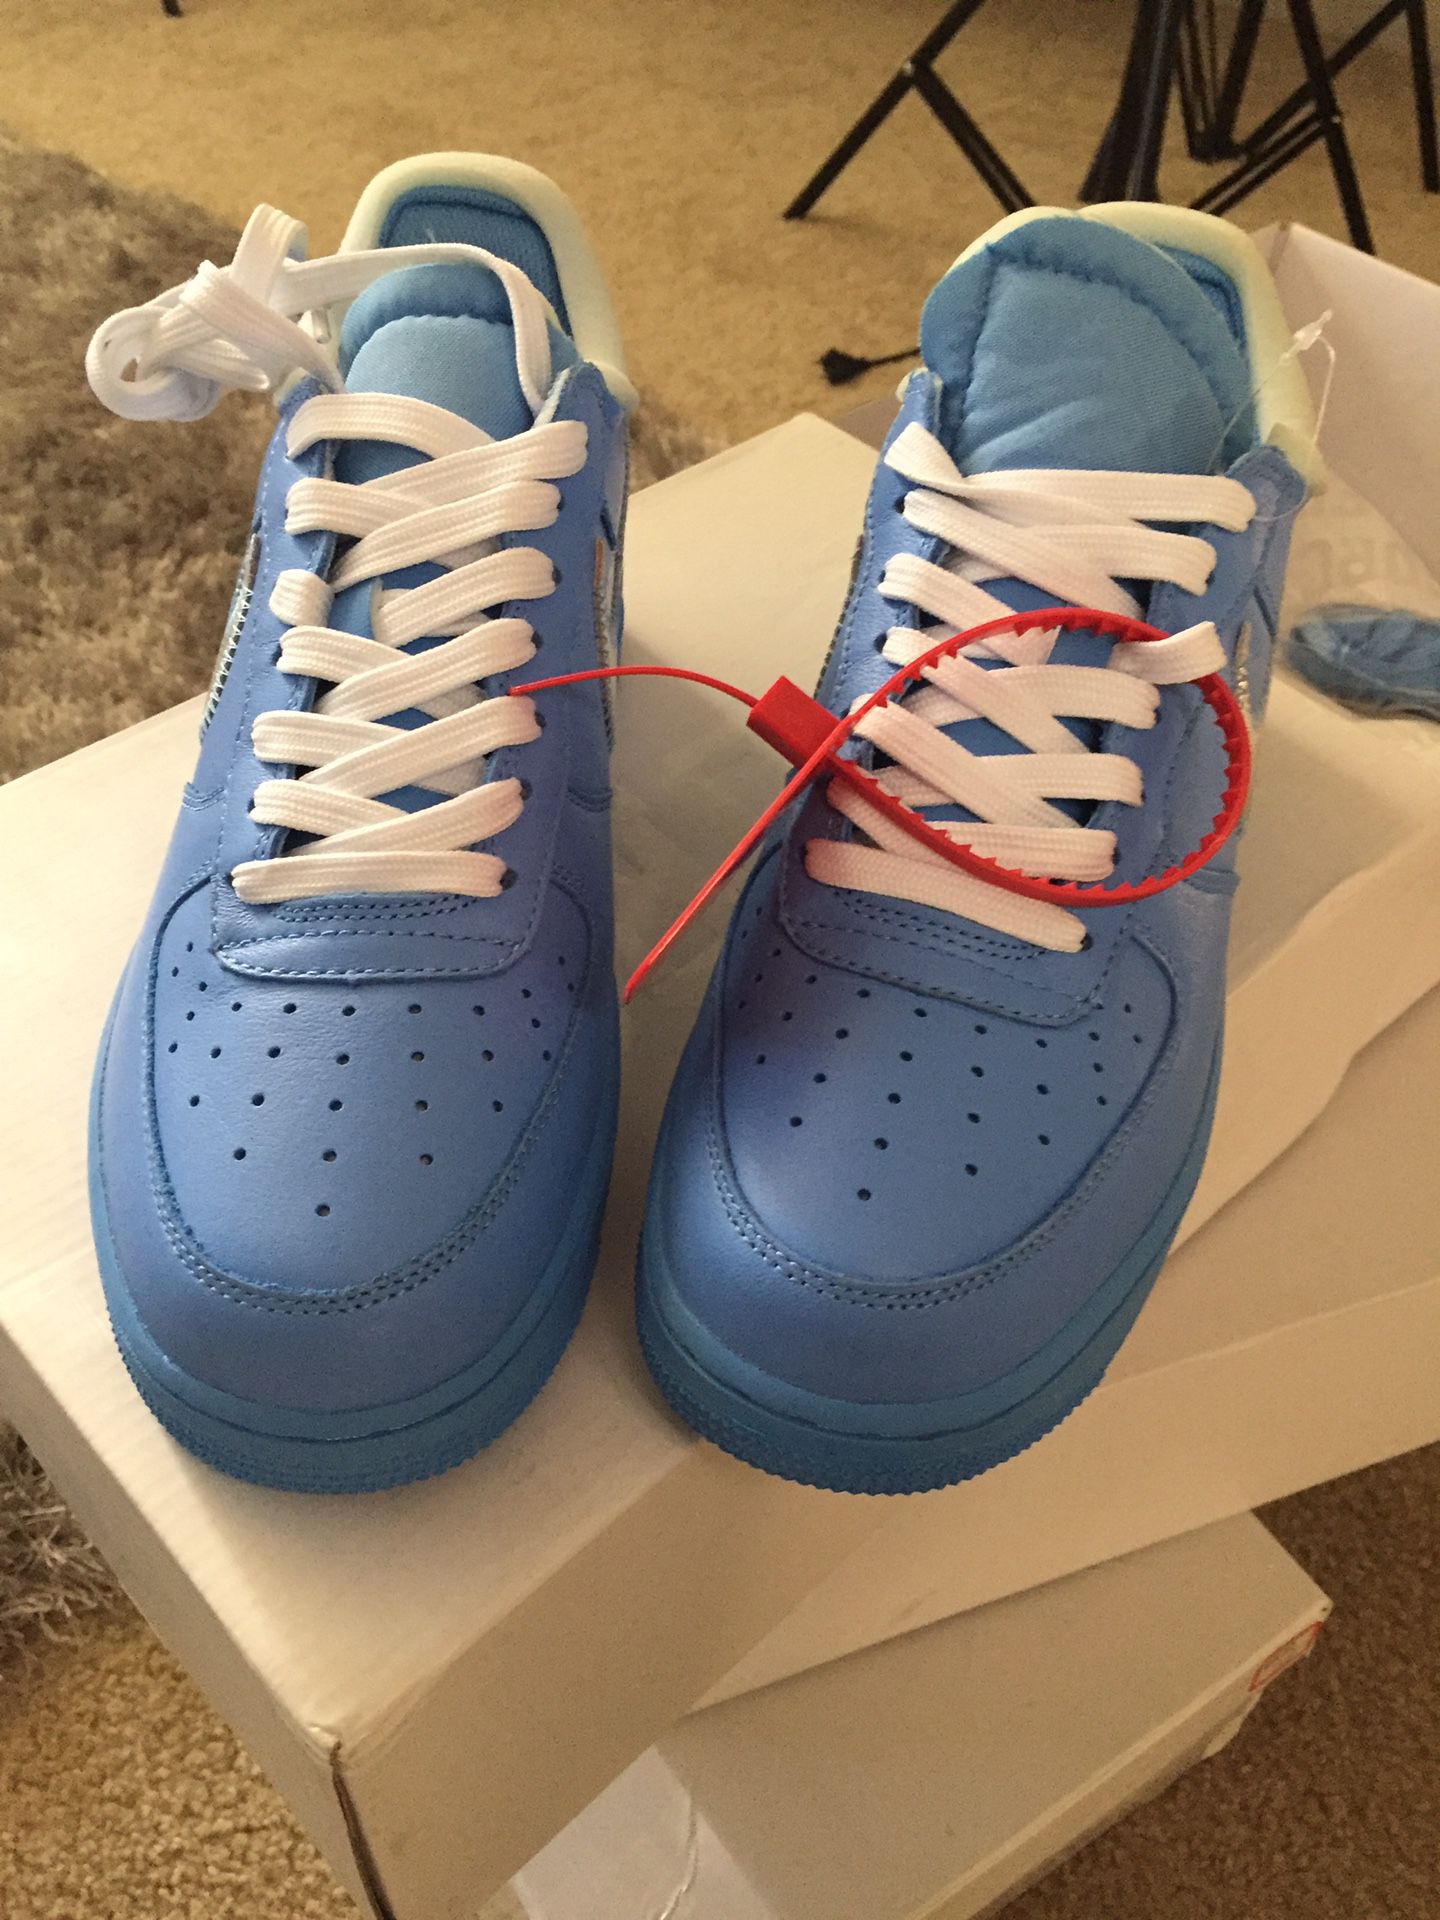 Off white Air Force 1 university blue, Women’s size 6 BRAND NEW 💙